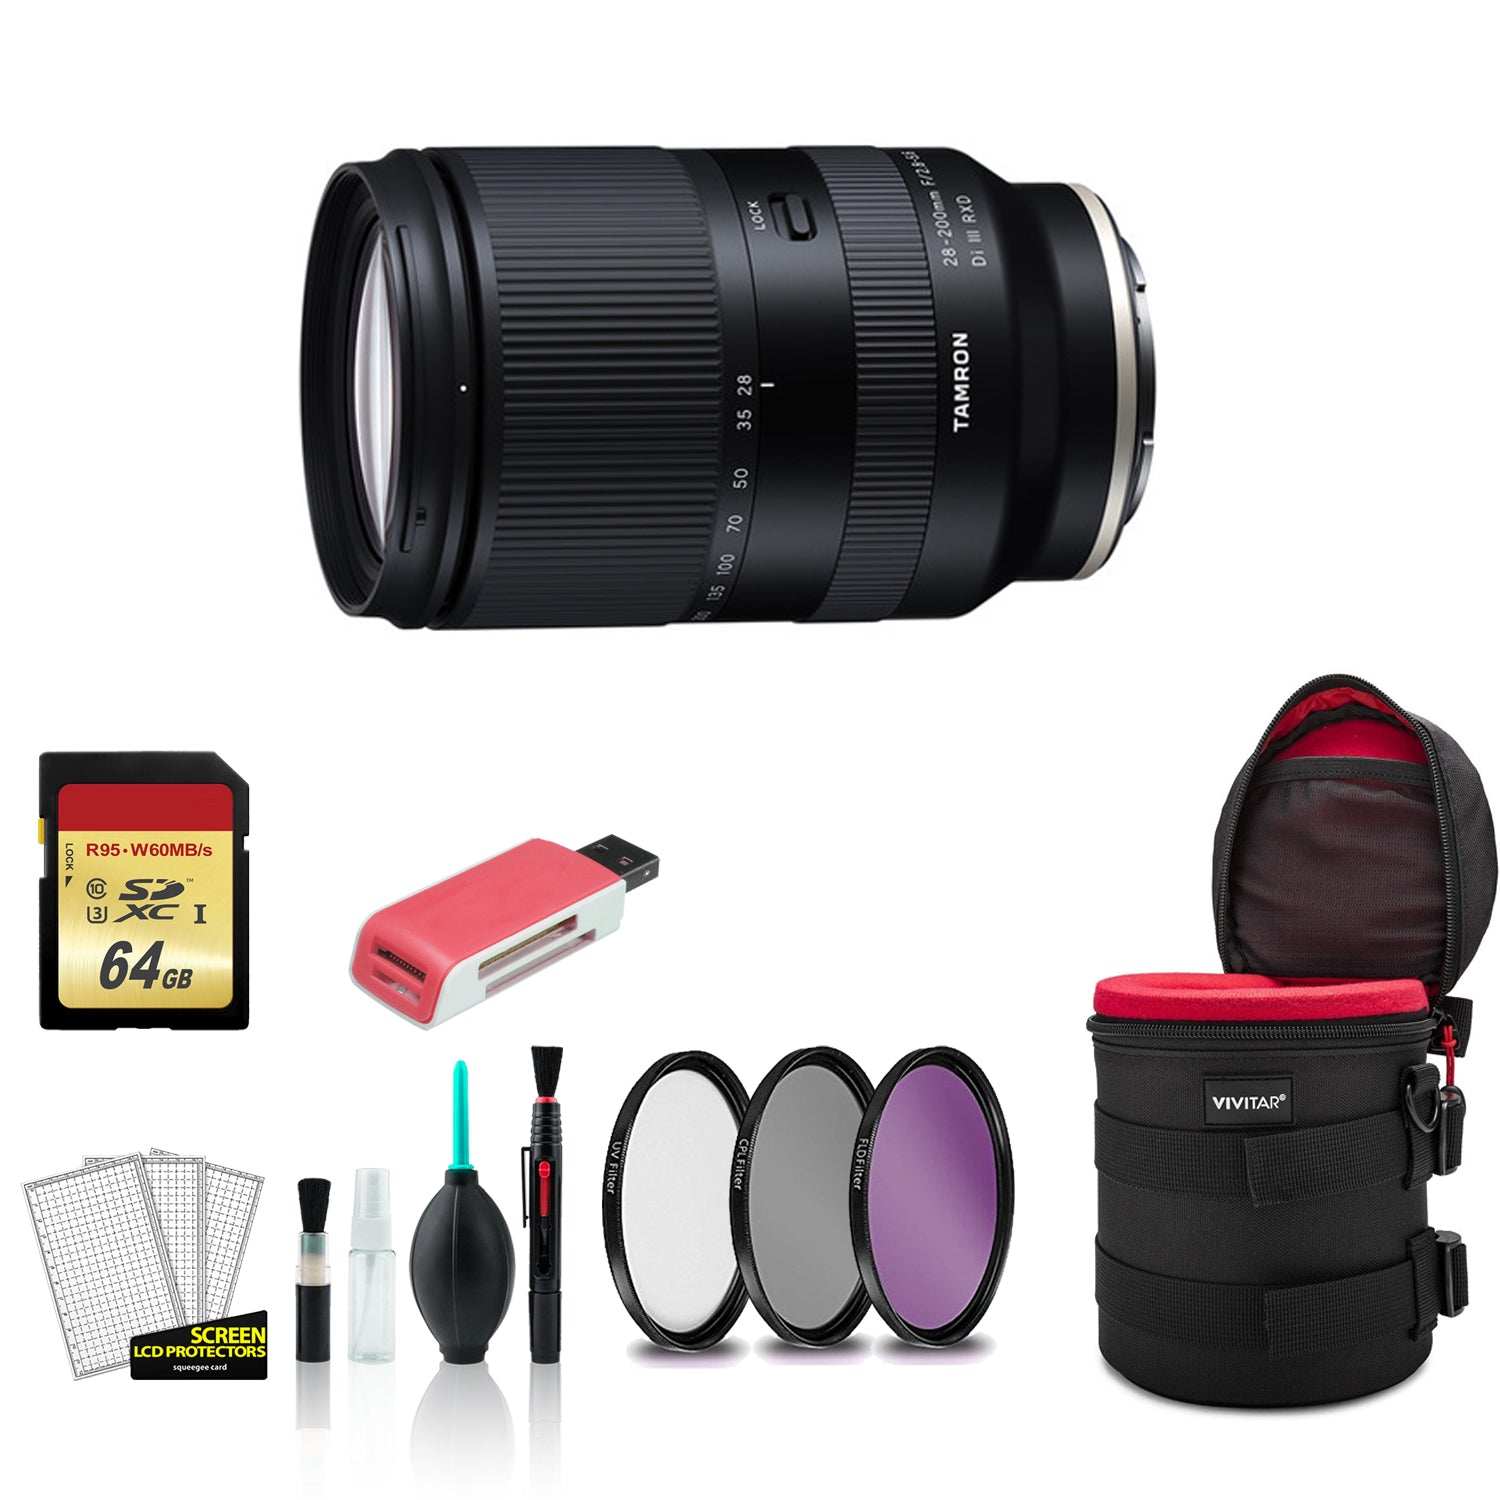 Tamron 28-200mm for Sony E f/2.8-5.6 Di III RXD Lens with Filter Kit + 64GB Memory Card (International Model) Bundle